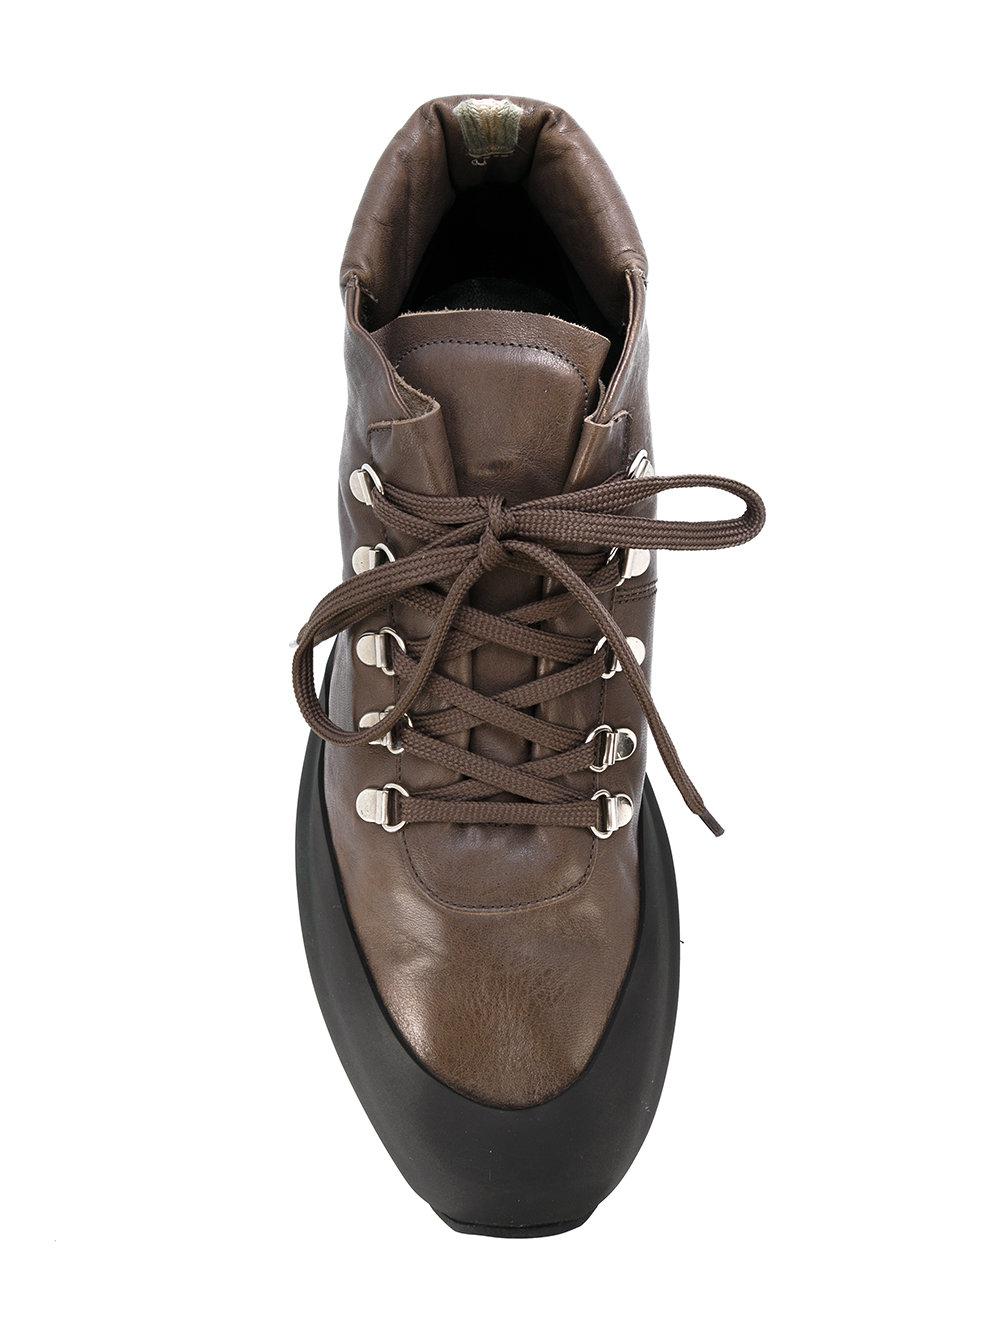 Officine Creative Leather Race Sneakers in Brown for Men - Lyst